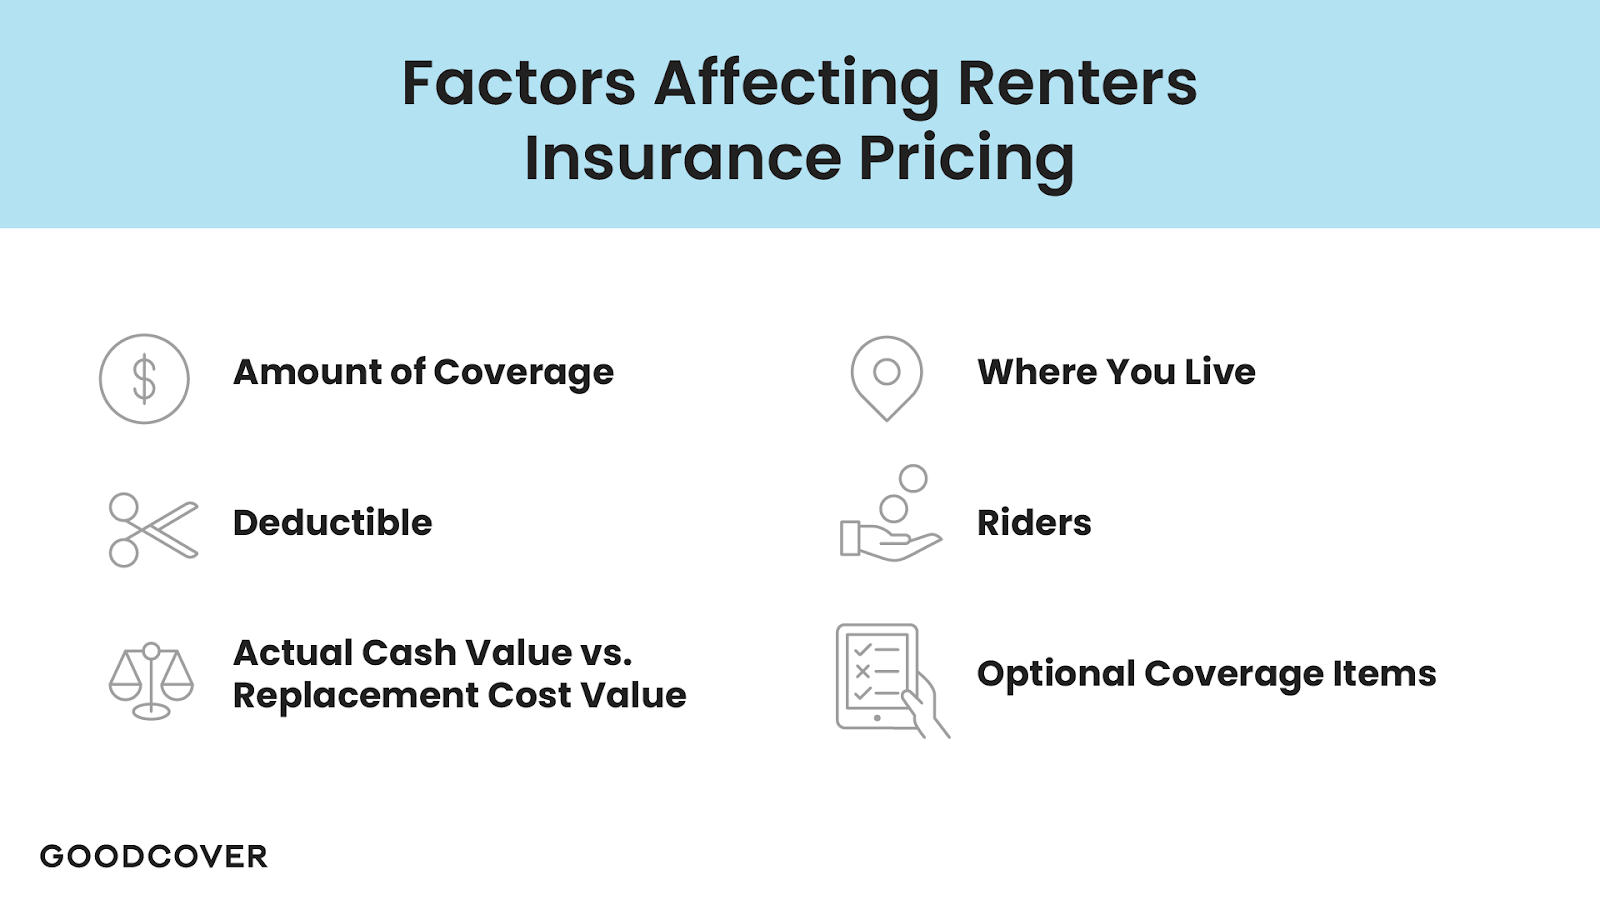 Some factors affecting renters insurance pricing.